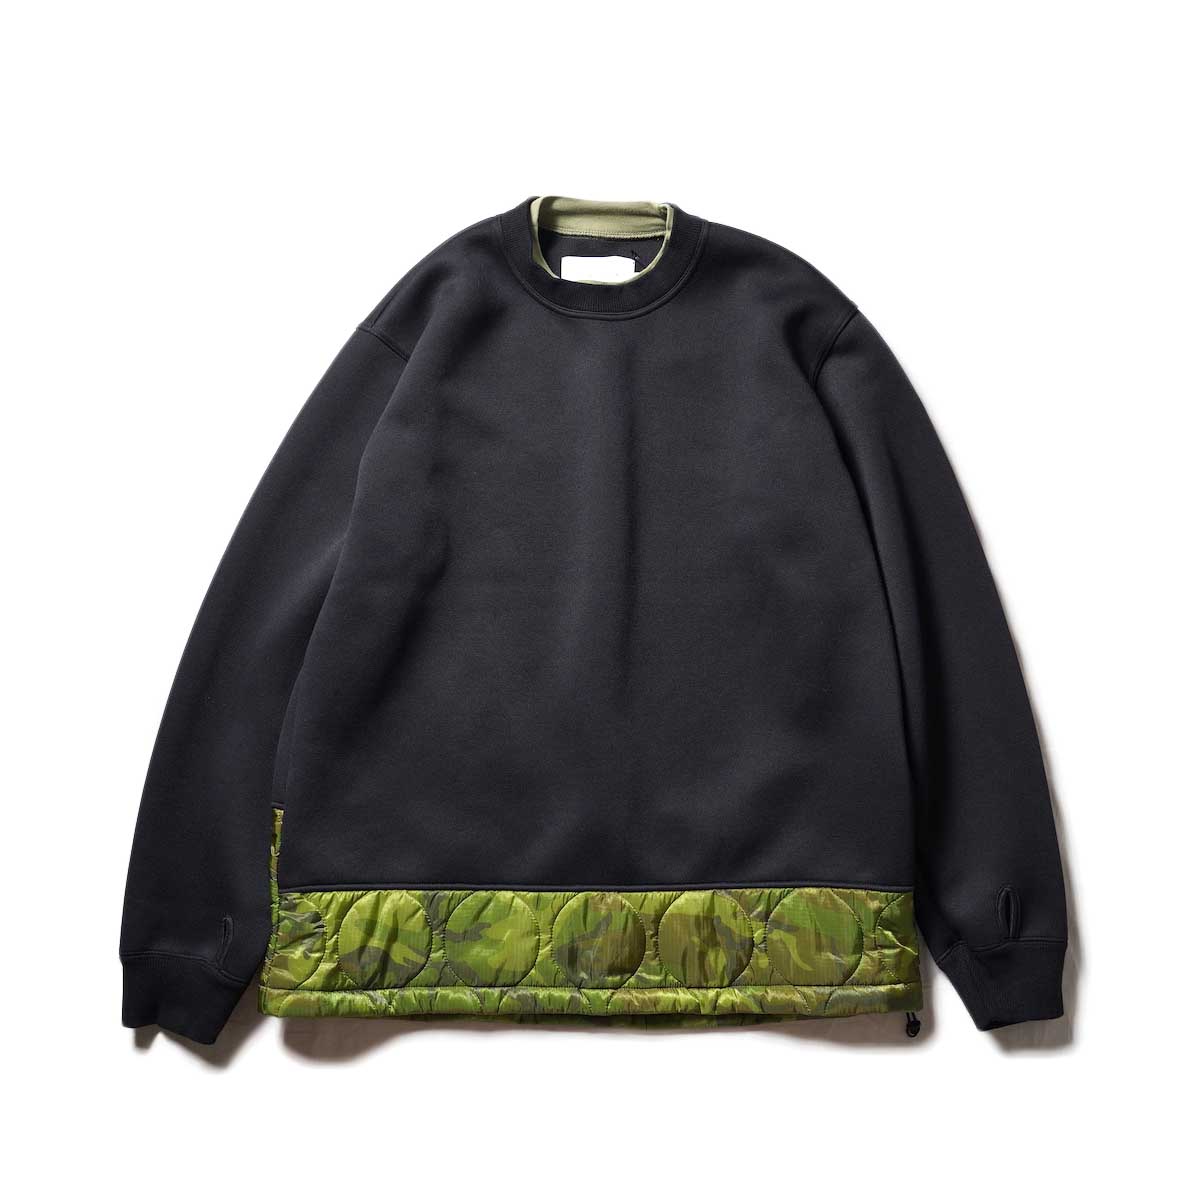 CURLY / SWITCHING QUILT SWEAT (Black / Camo)